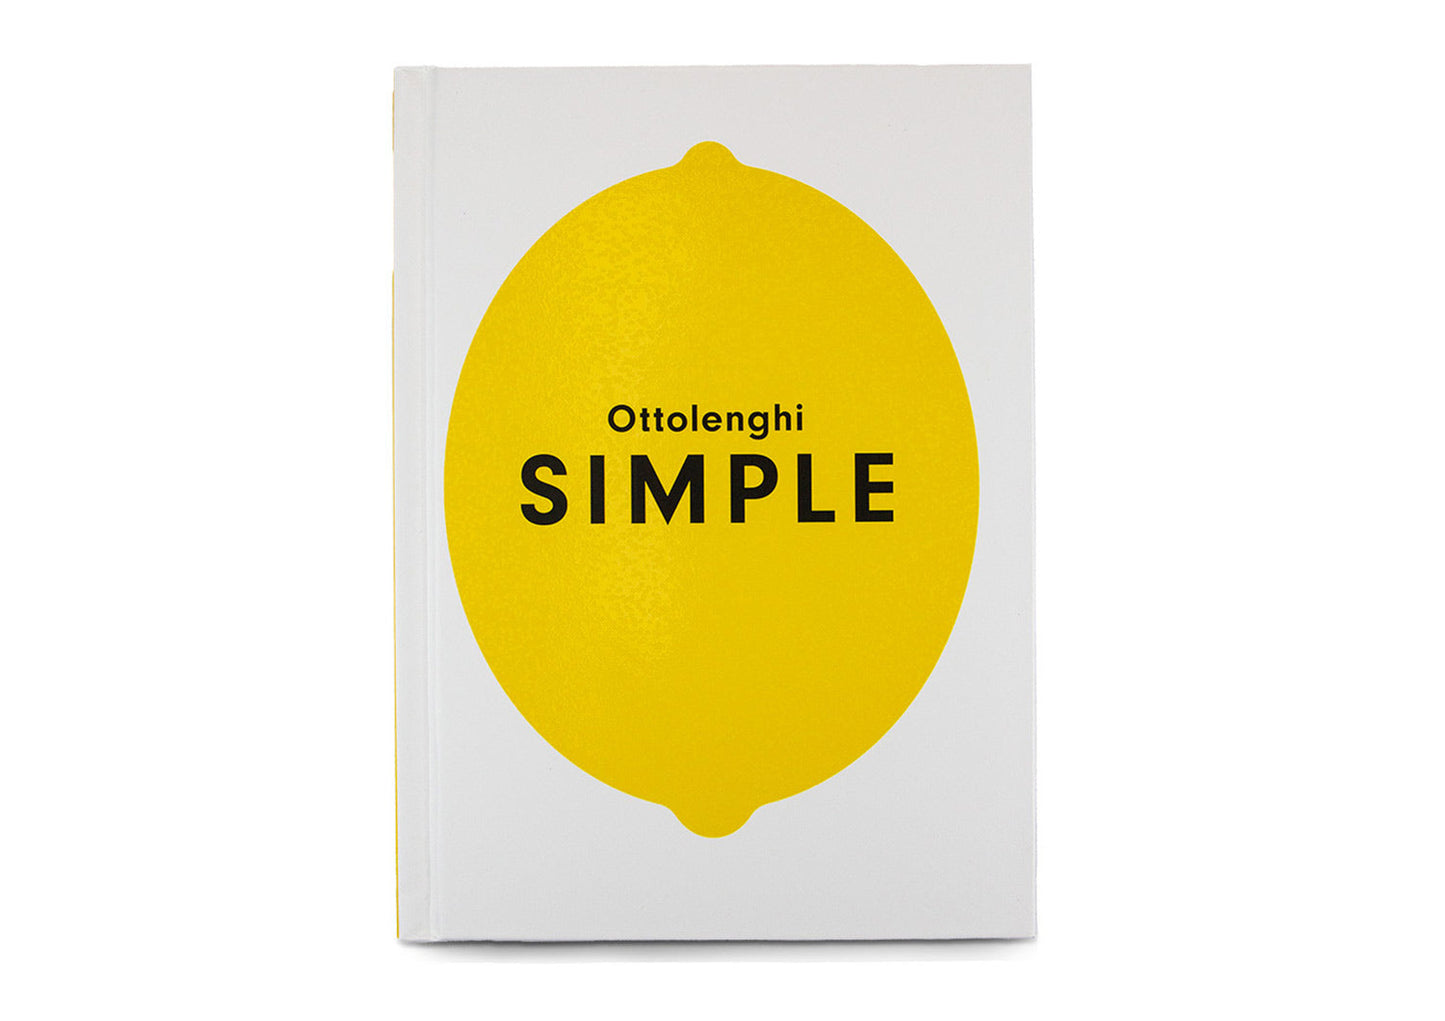 Simple Ottolenghi Collection